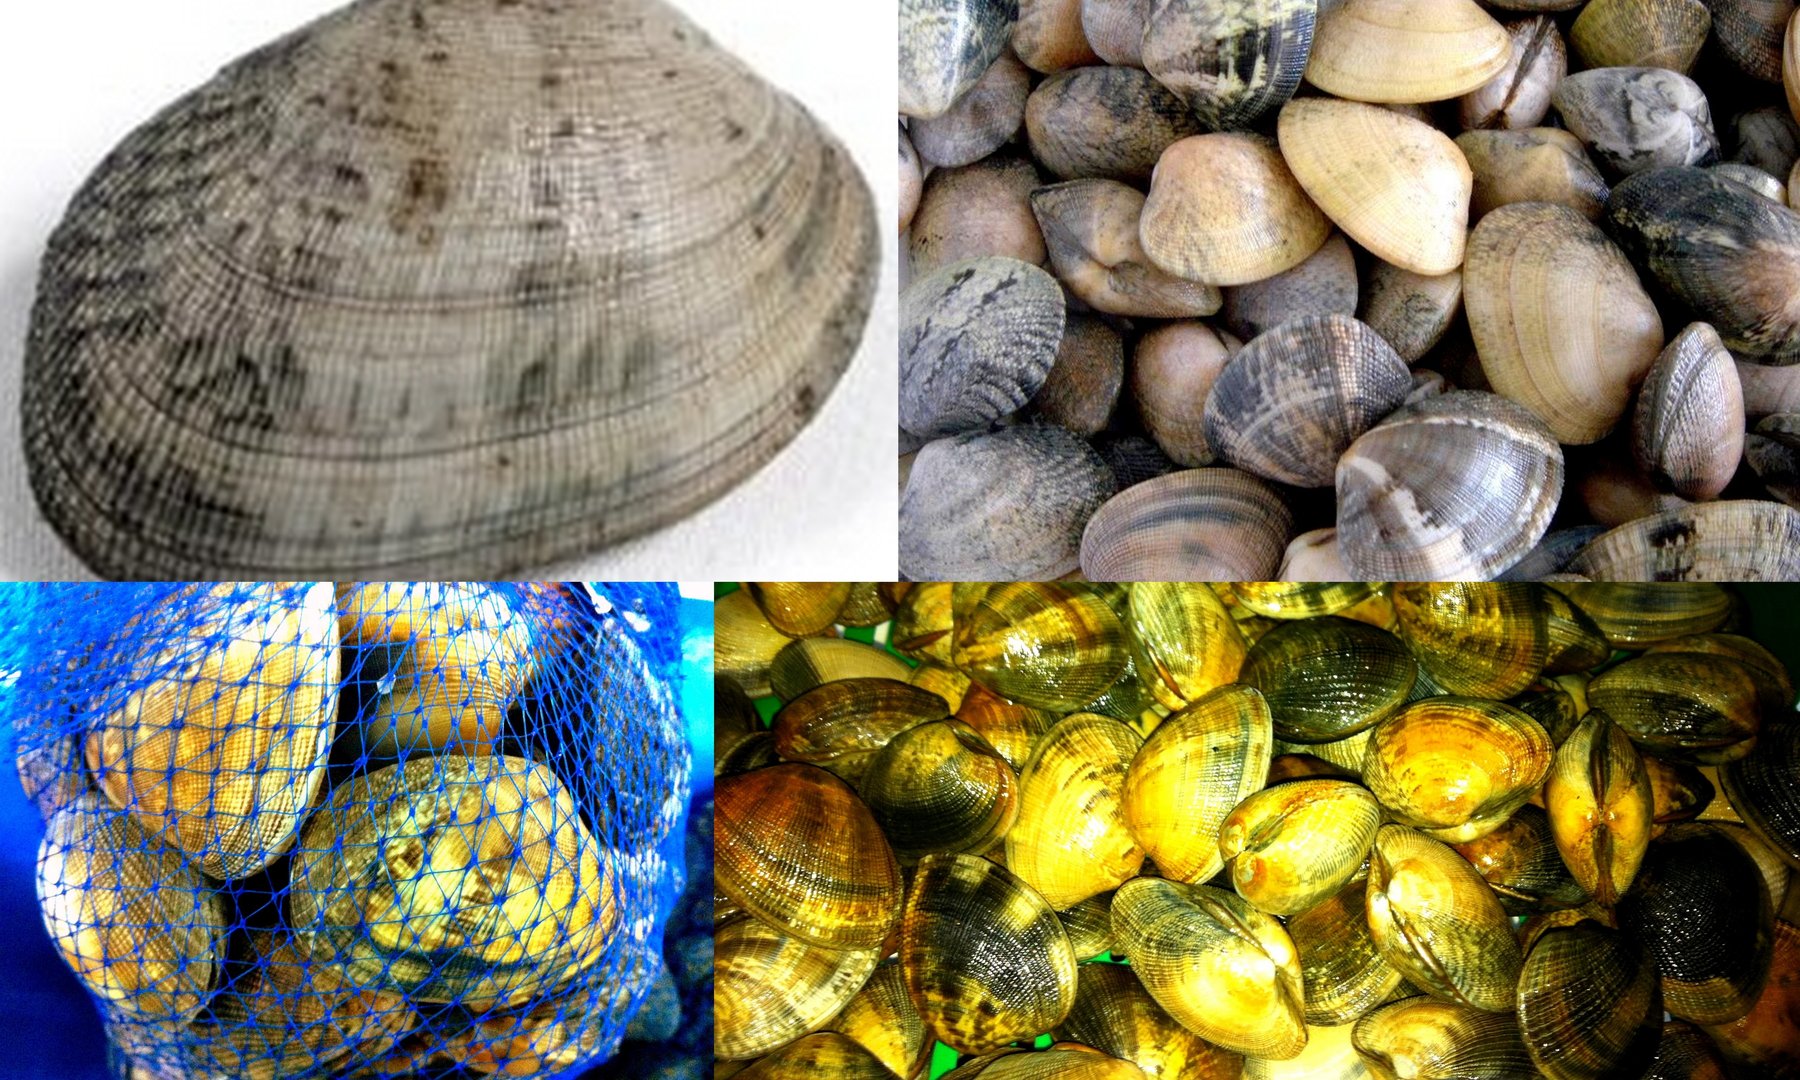 clams: diffferent types of clams